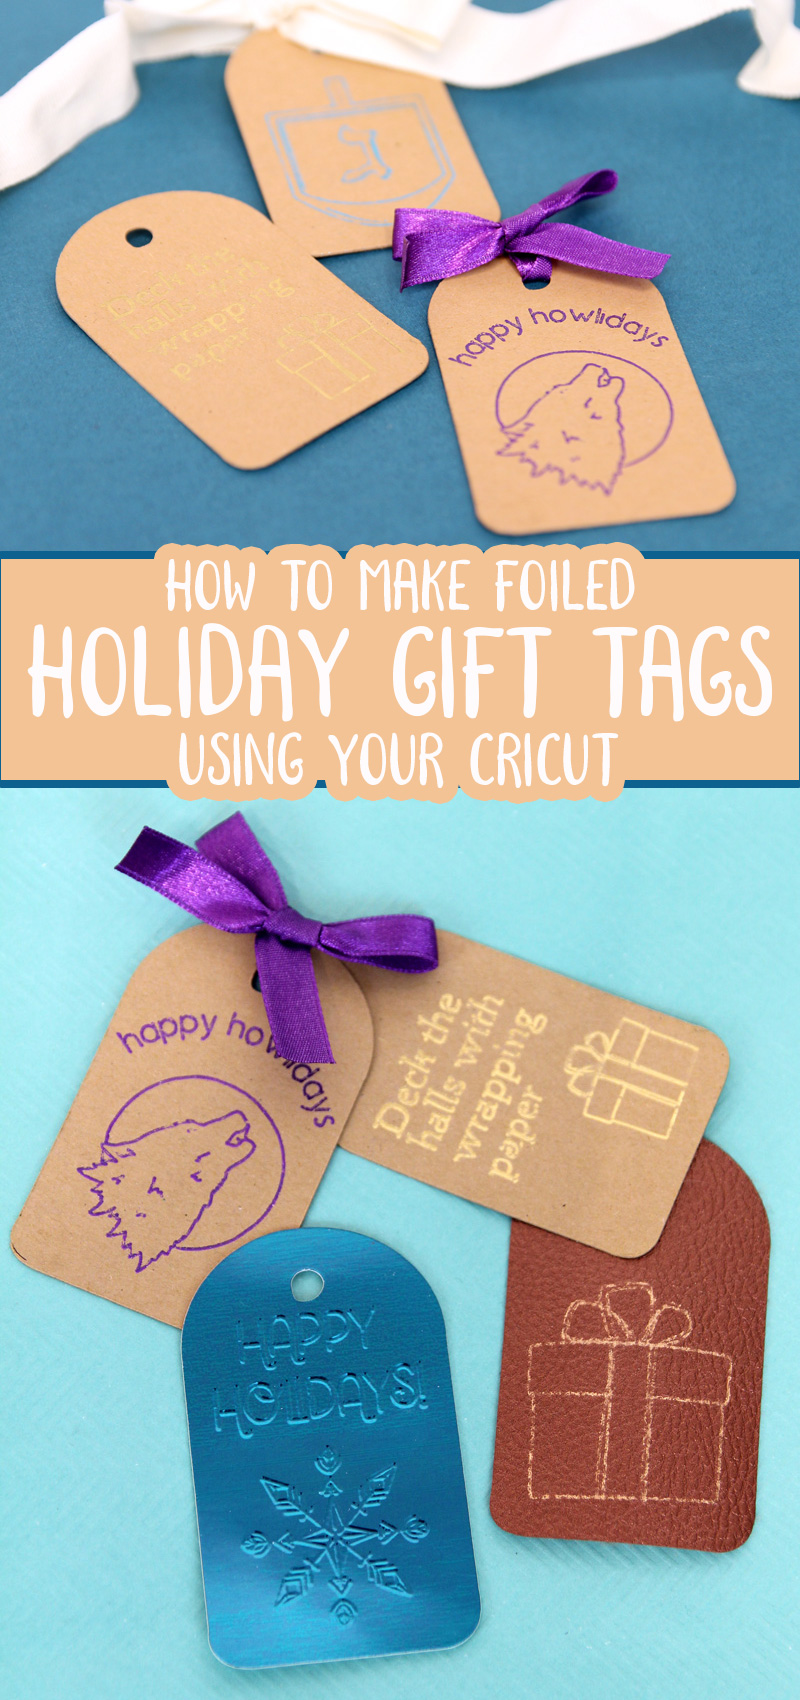 Free Printable Gift Labels & Tags - Summer Theme - Pretty Darn Adorable